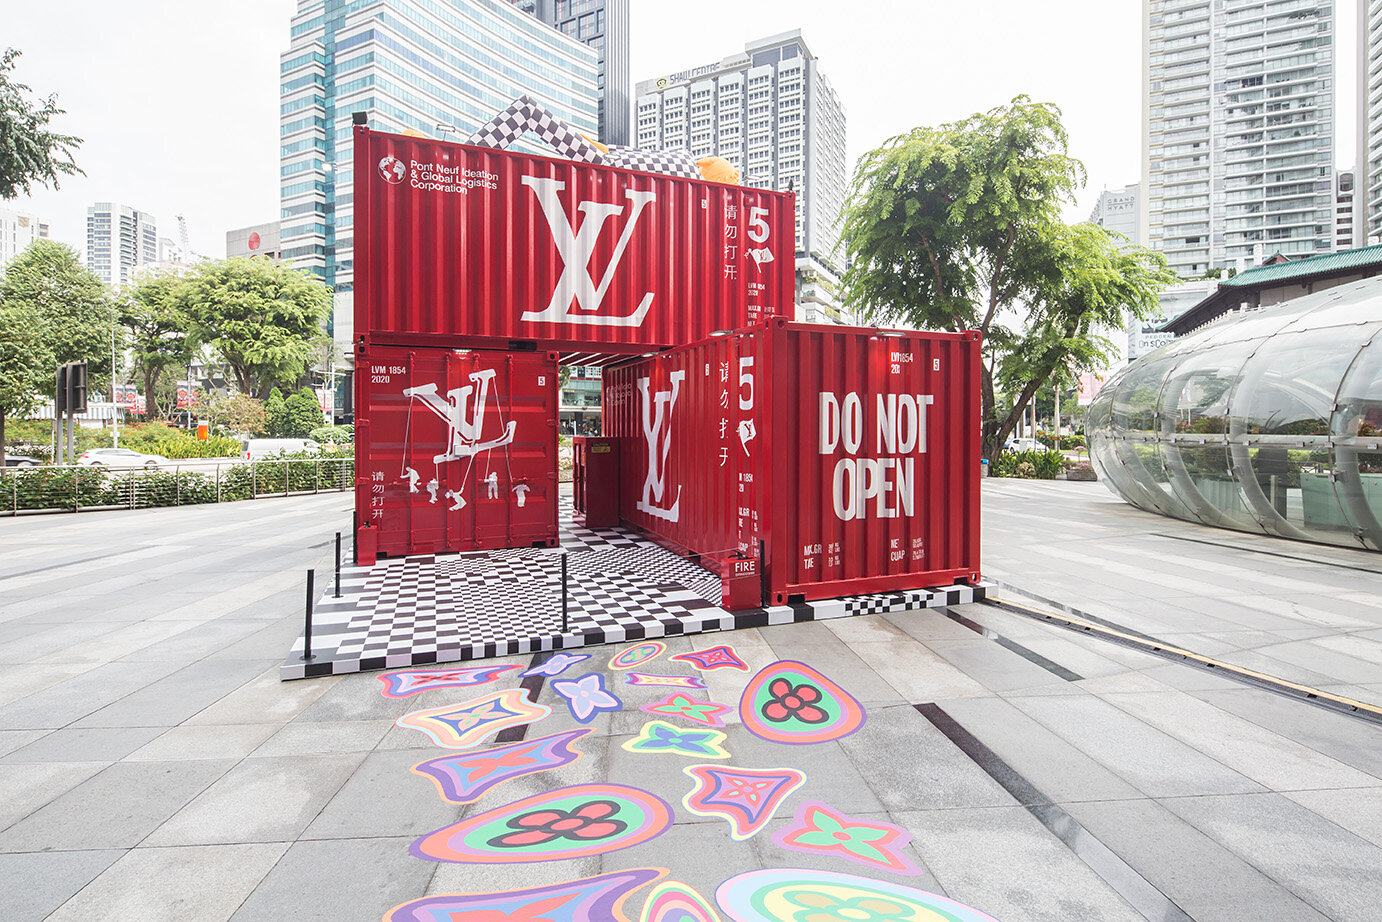 vuitton shipping containers